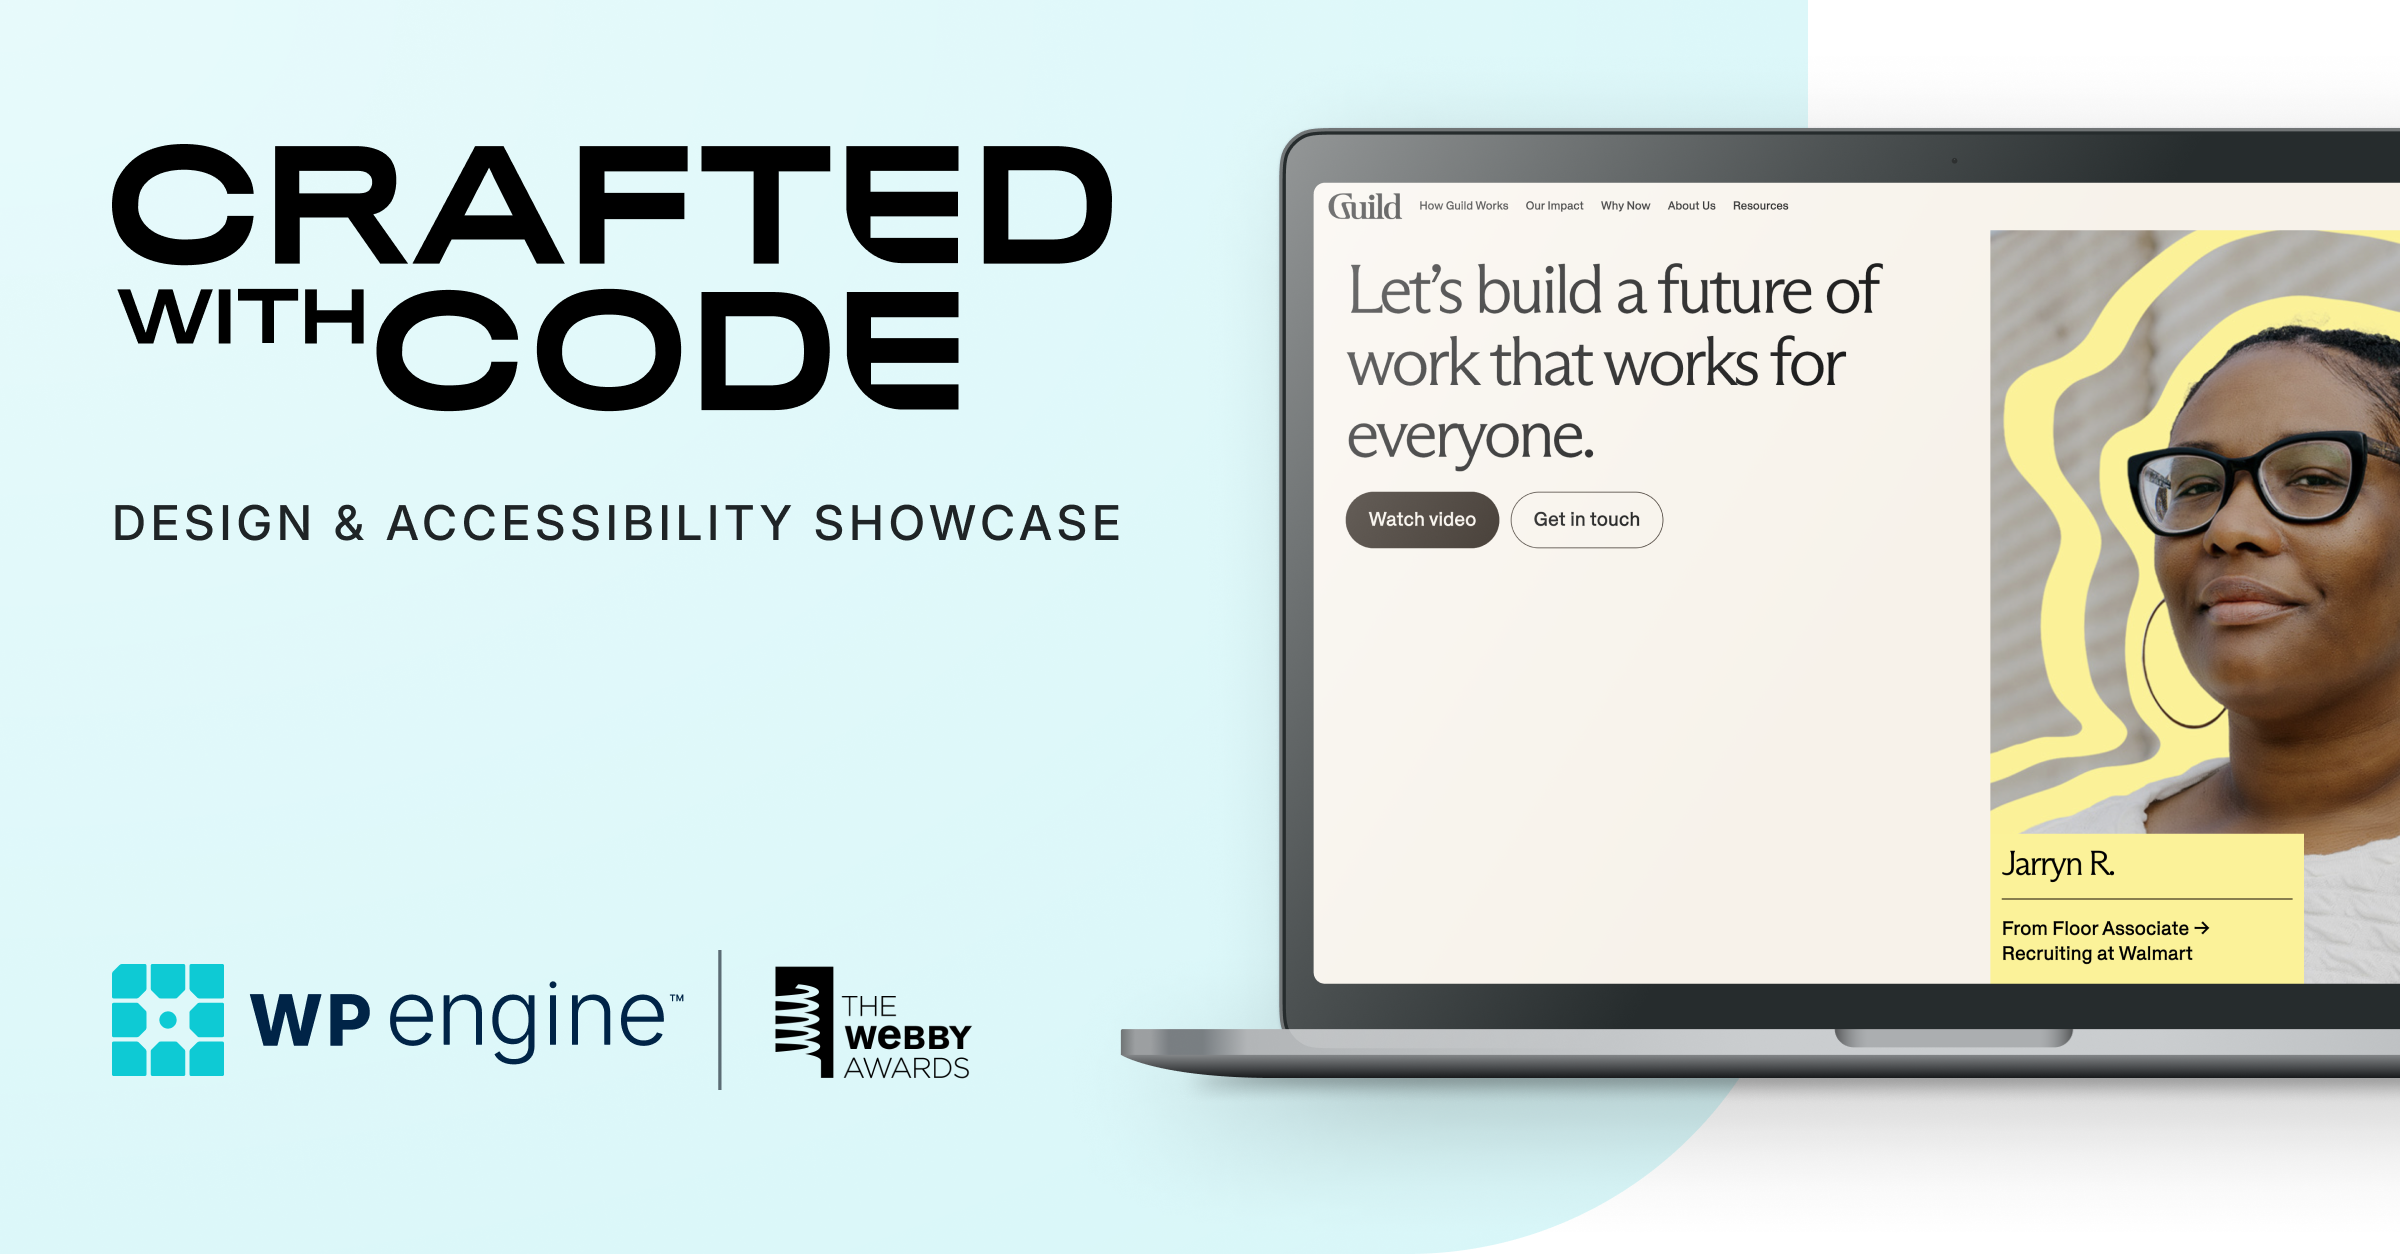 Crafted with Code. Design & accessibility showcase